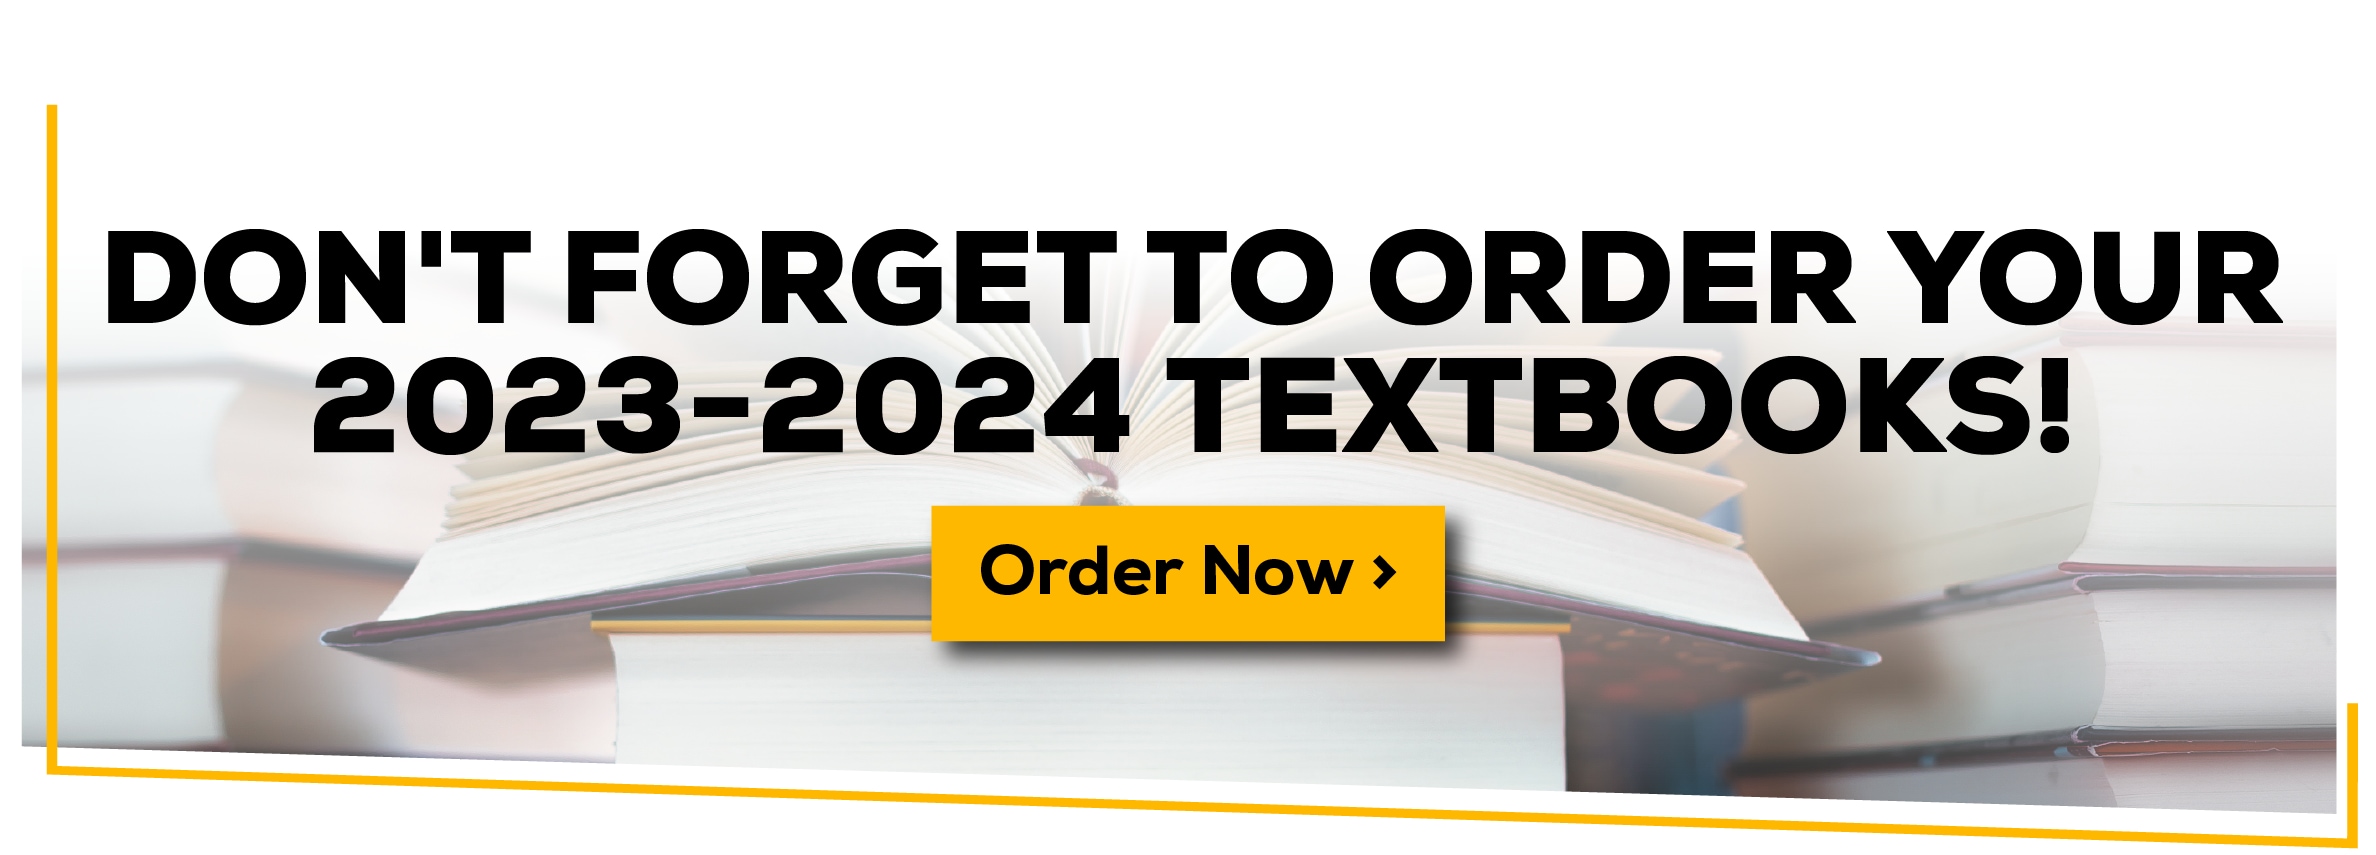 Don't forget to order your 2023-2024 textbooks. Order Now!